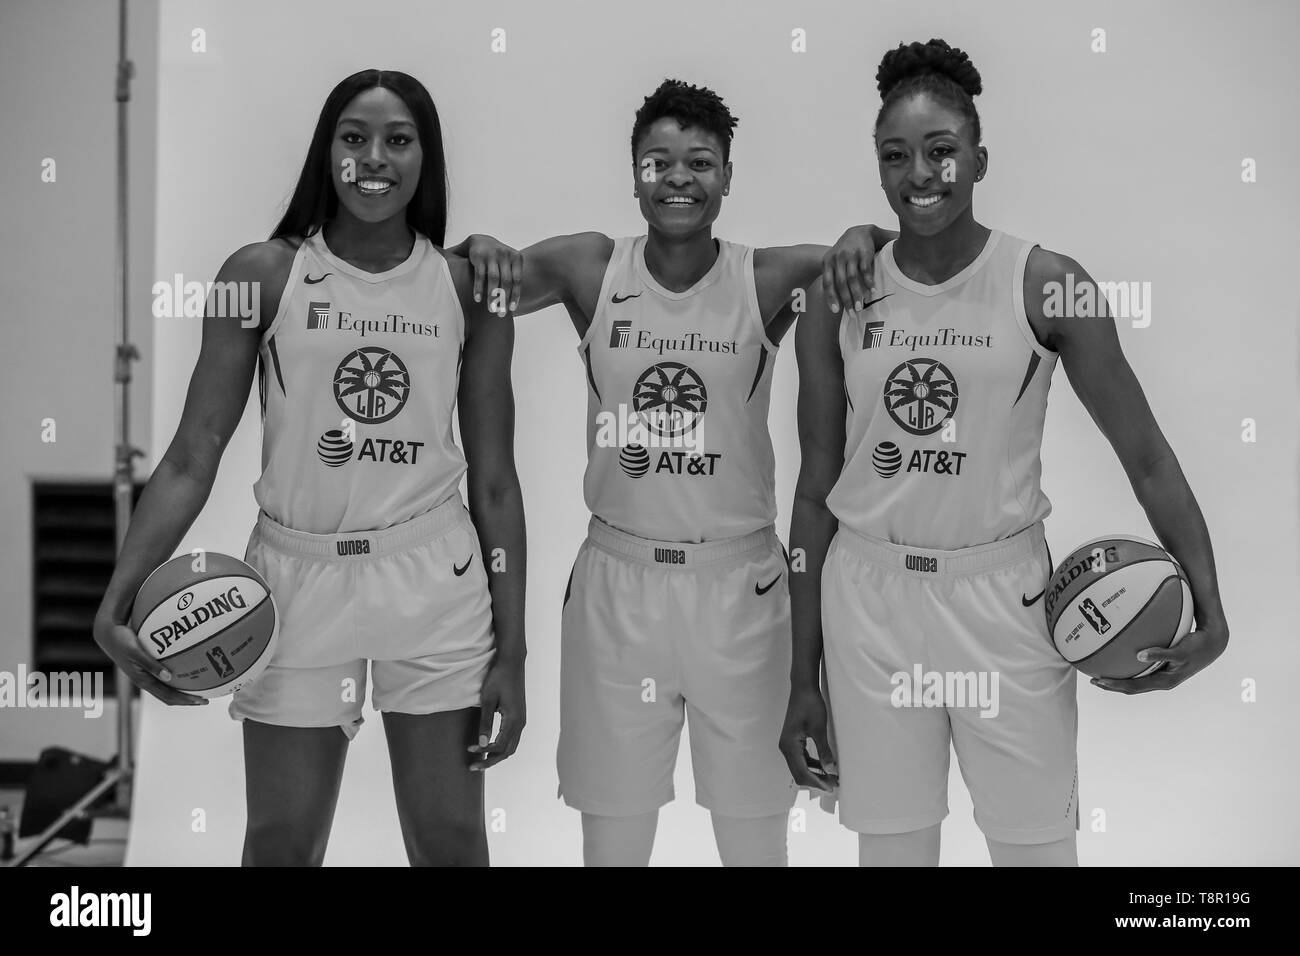 WNBA 2019: Los Angeles Sparks forward Chiney Ogwumike #13, Los Angeles Sparks guard Alana Beard #0, and Los Angeles Sparks forward Nneka Ogwumike #30 during Los Angeles Sparks Media Day May 14, 2019 at Los Angeles Southwest College. (Photo by Jevone Moore) Stock Photo